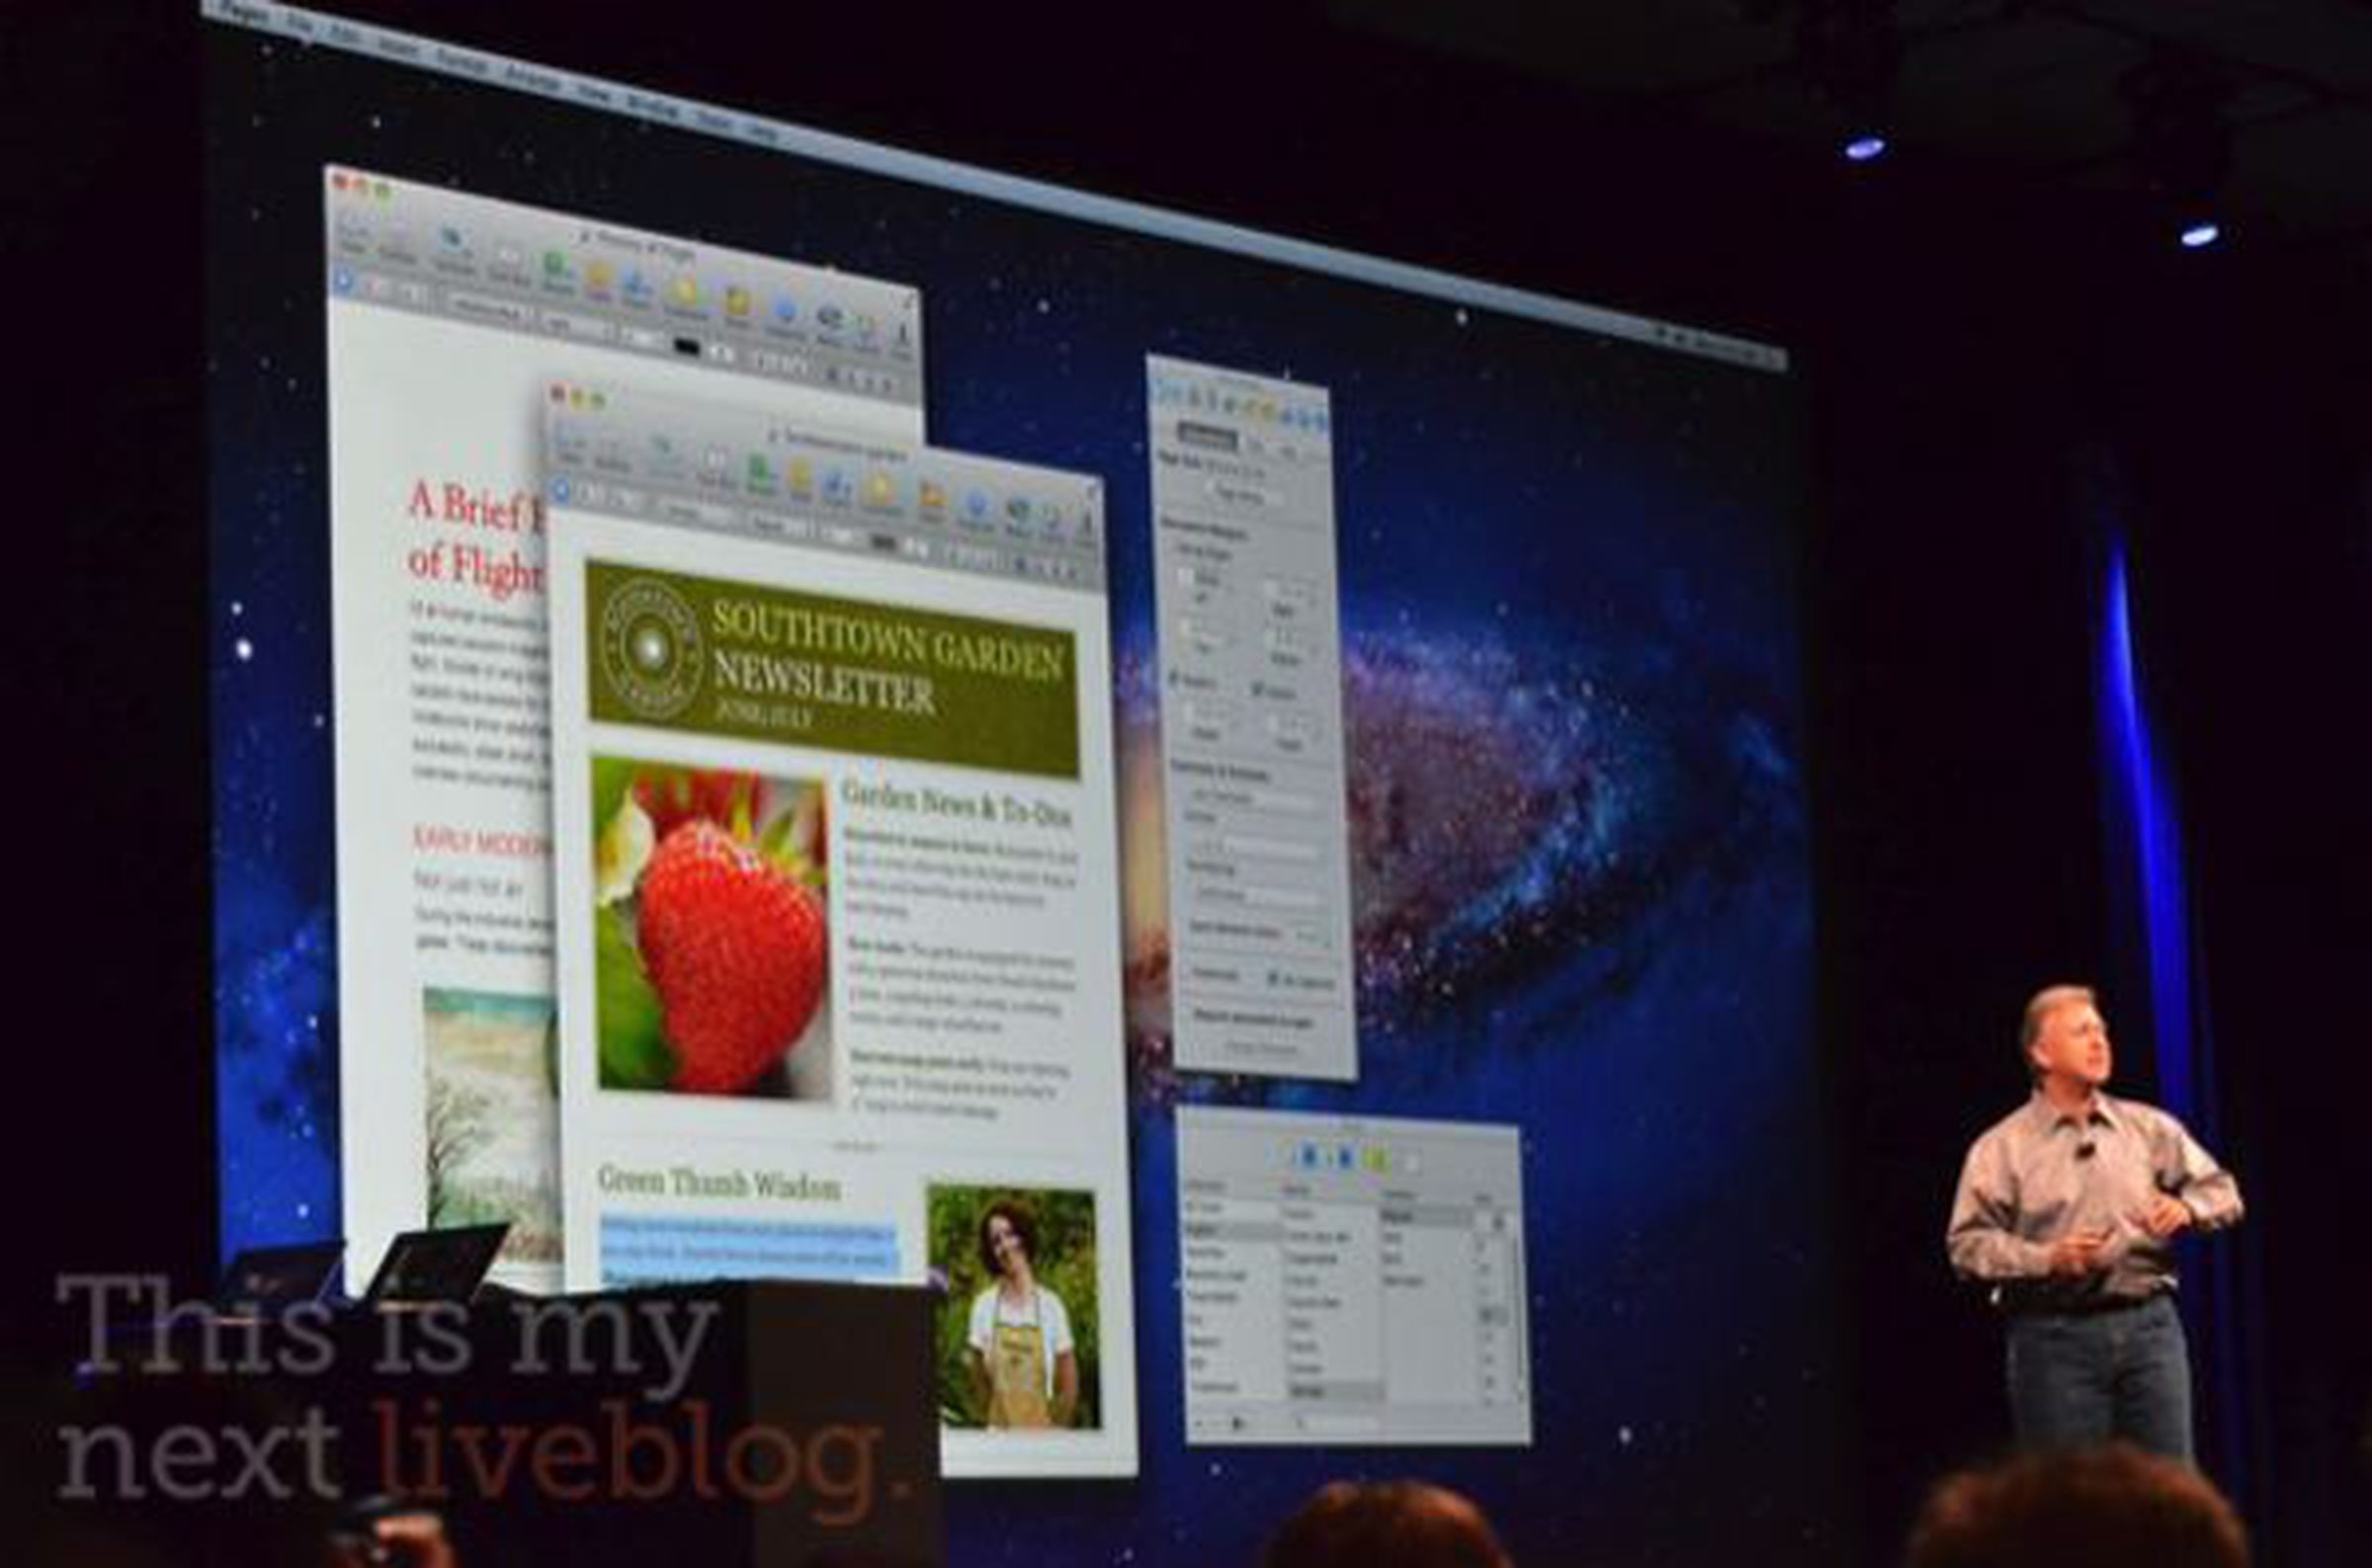 Apple makes Mac OS X Lion available in the Mac App Store for $29.99